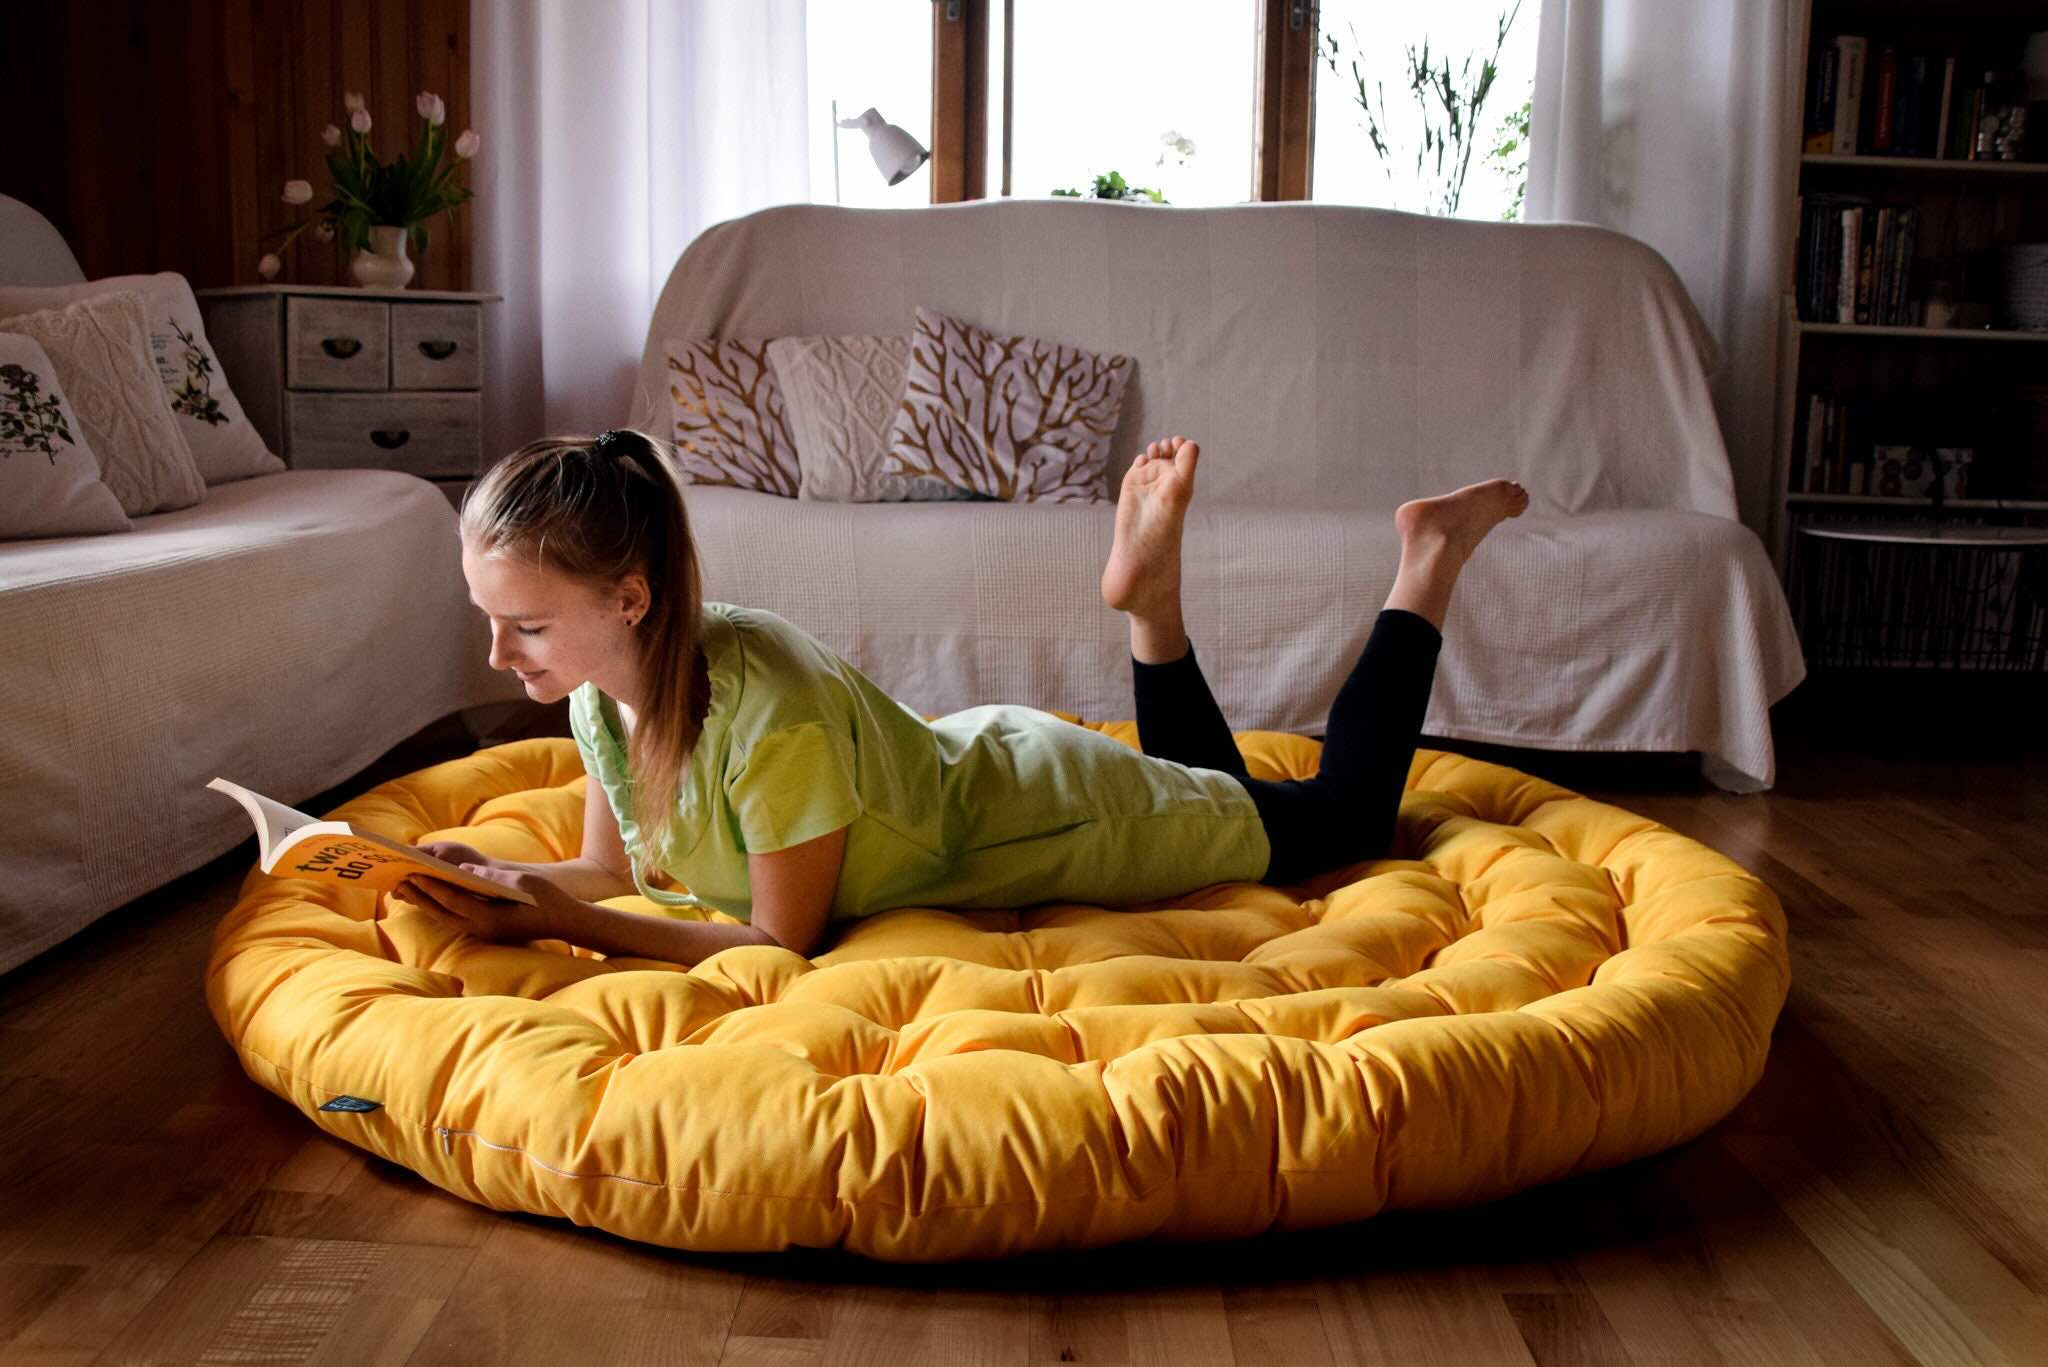 How To Make Big Floor Pillows